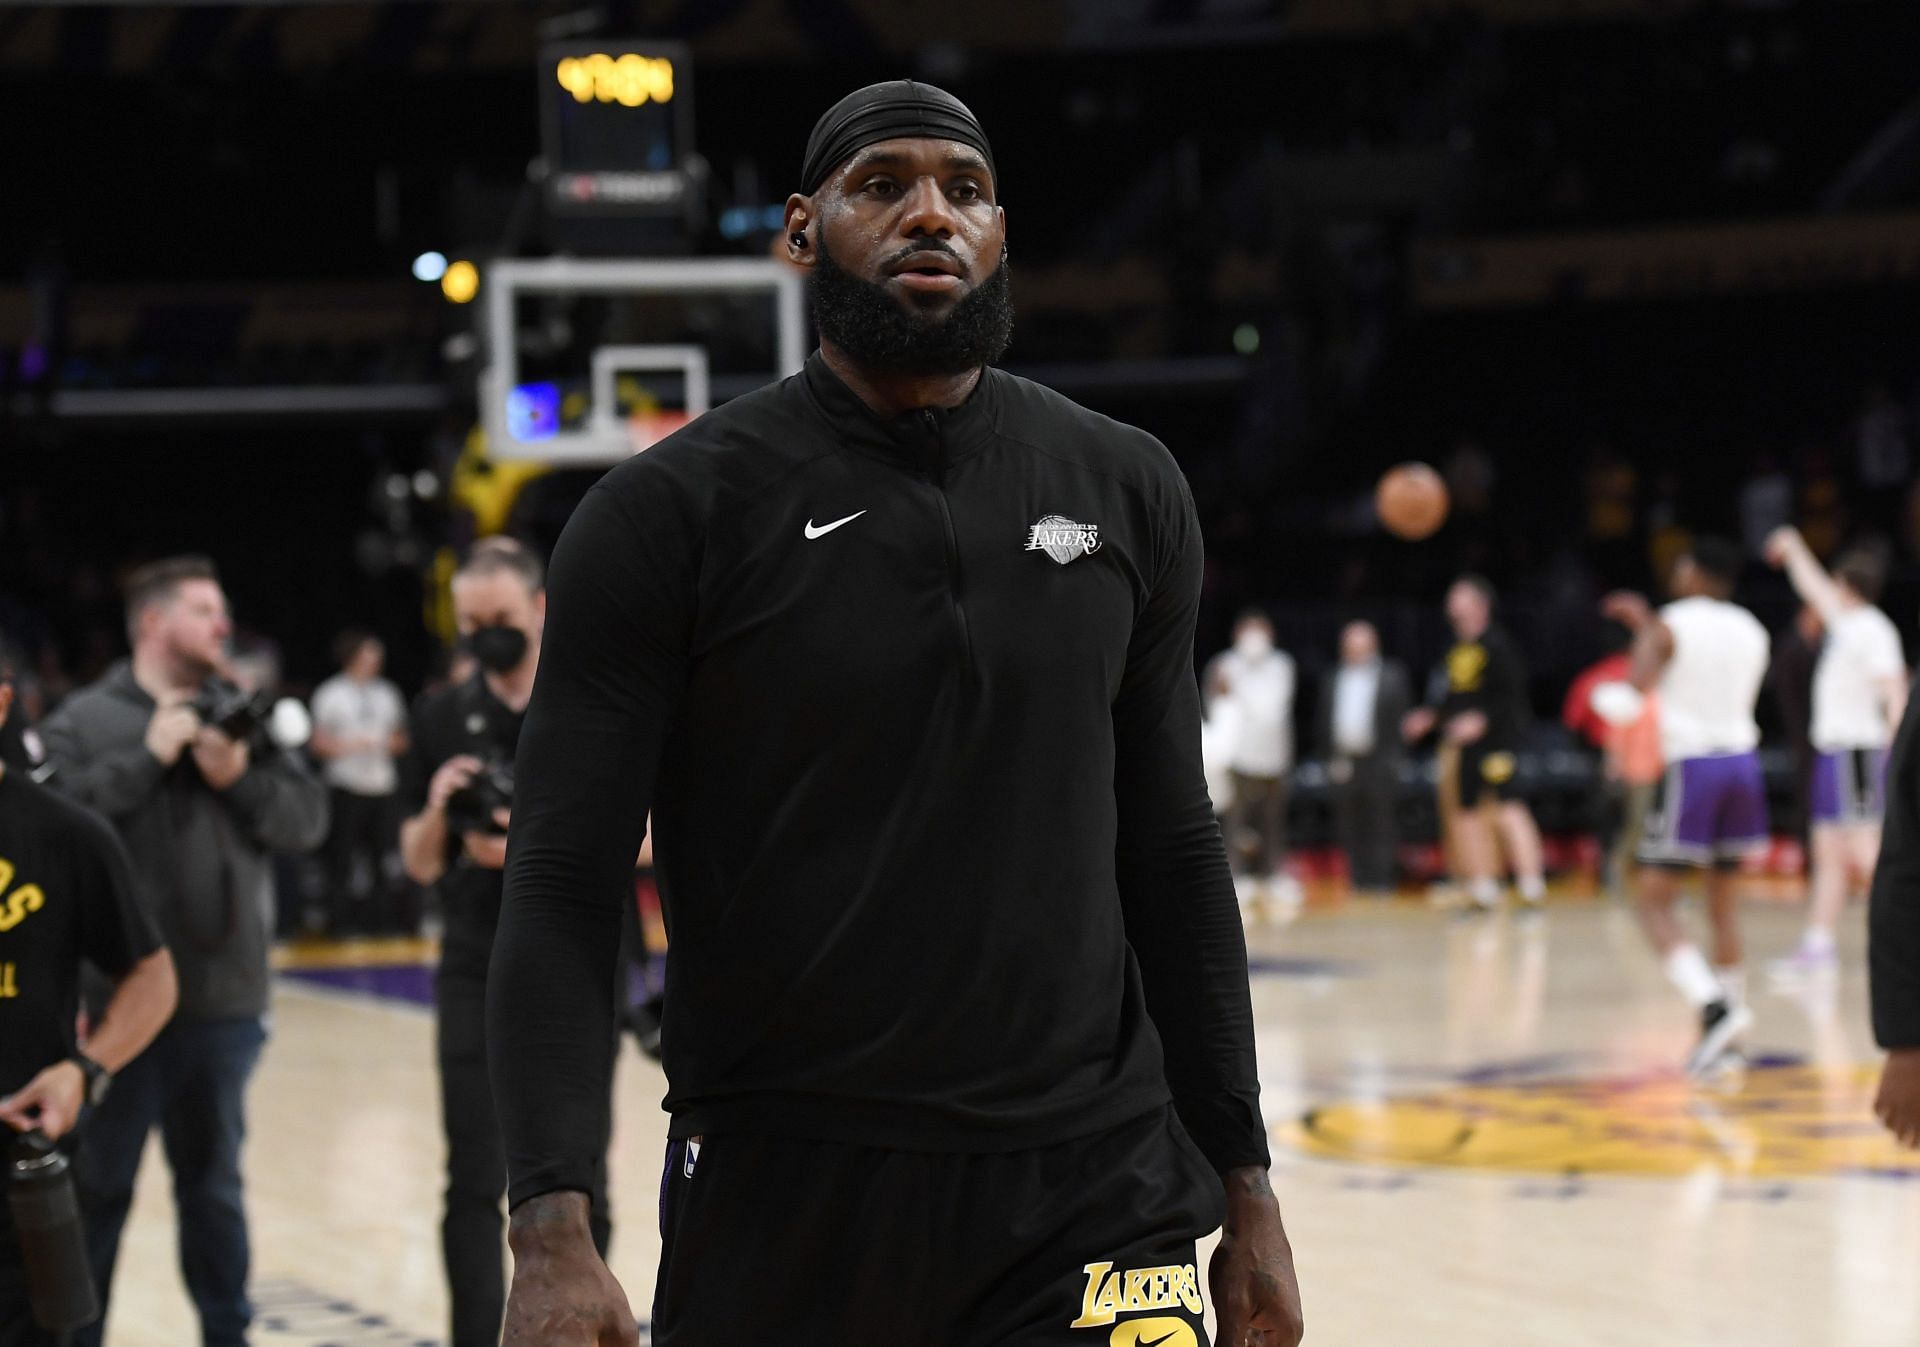 LeBron James #6 of the Los Angeles Lakers walks off the court after warming up before the basketball game against the New Orleans Pelicans at Crypto.com Arena on April 1, 2022 in Los Angeles, California.